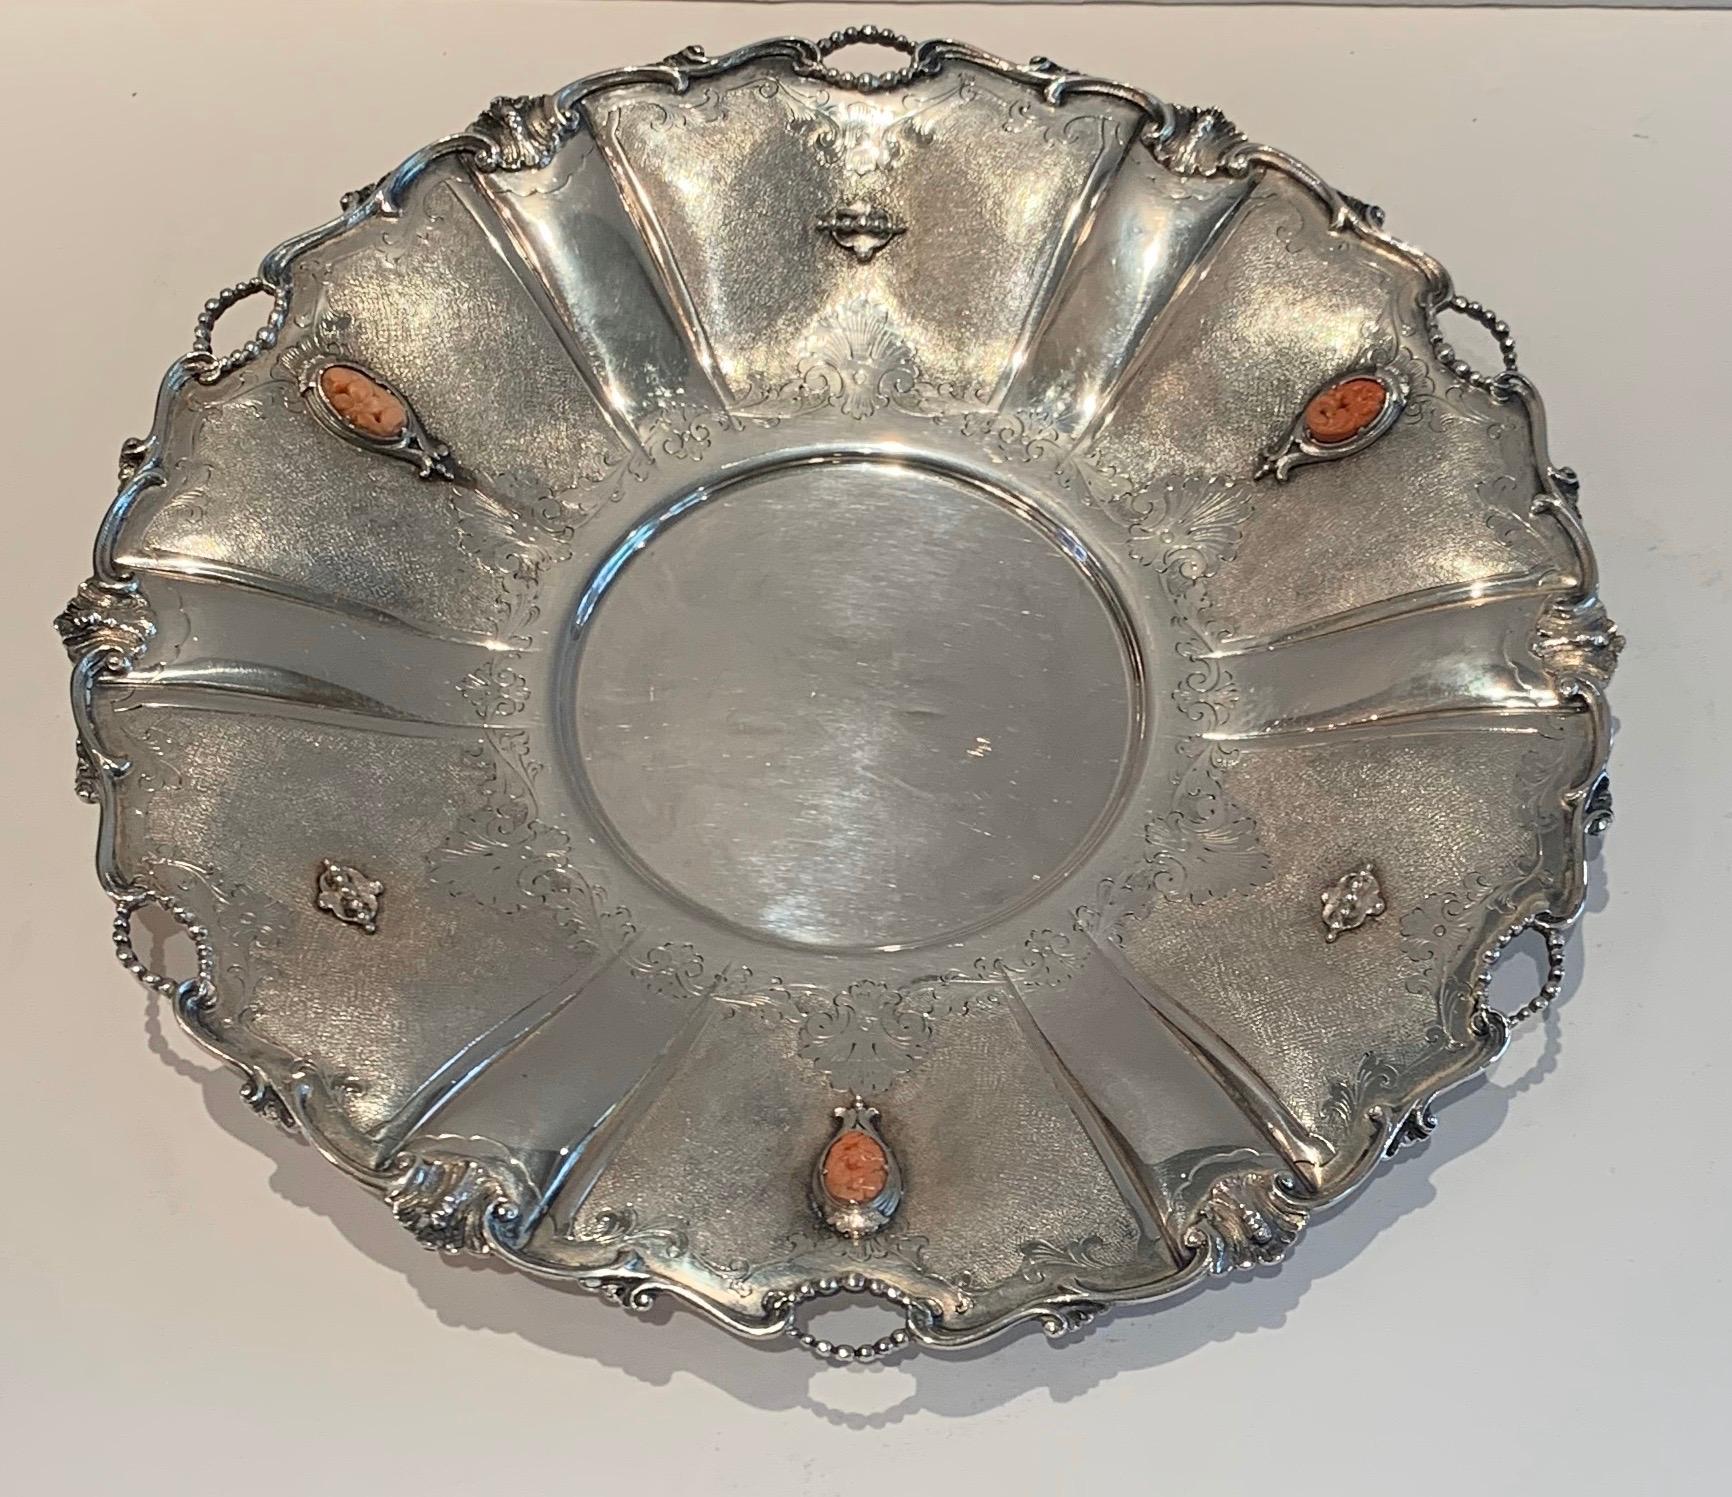 A wonderful European 800 sterling silver round platter with pierced border and mounted with 3 carved coral decorations.